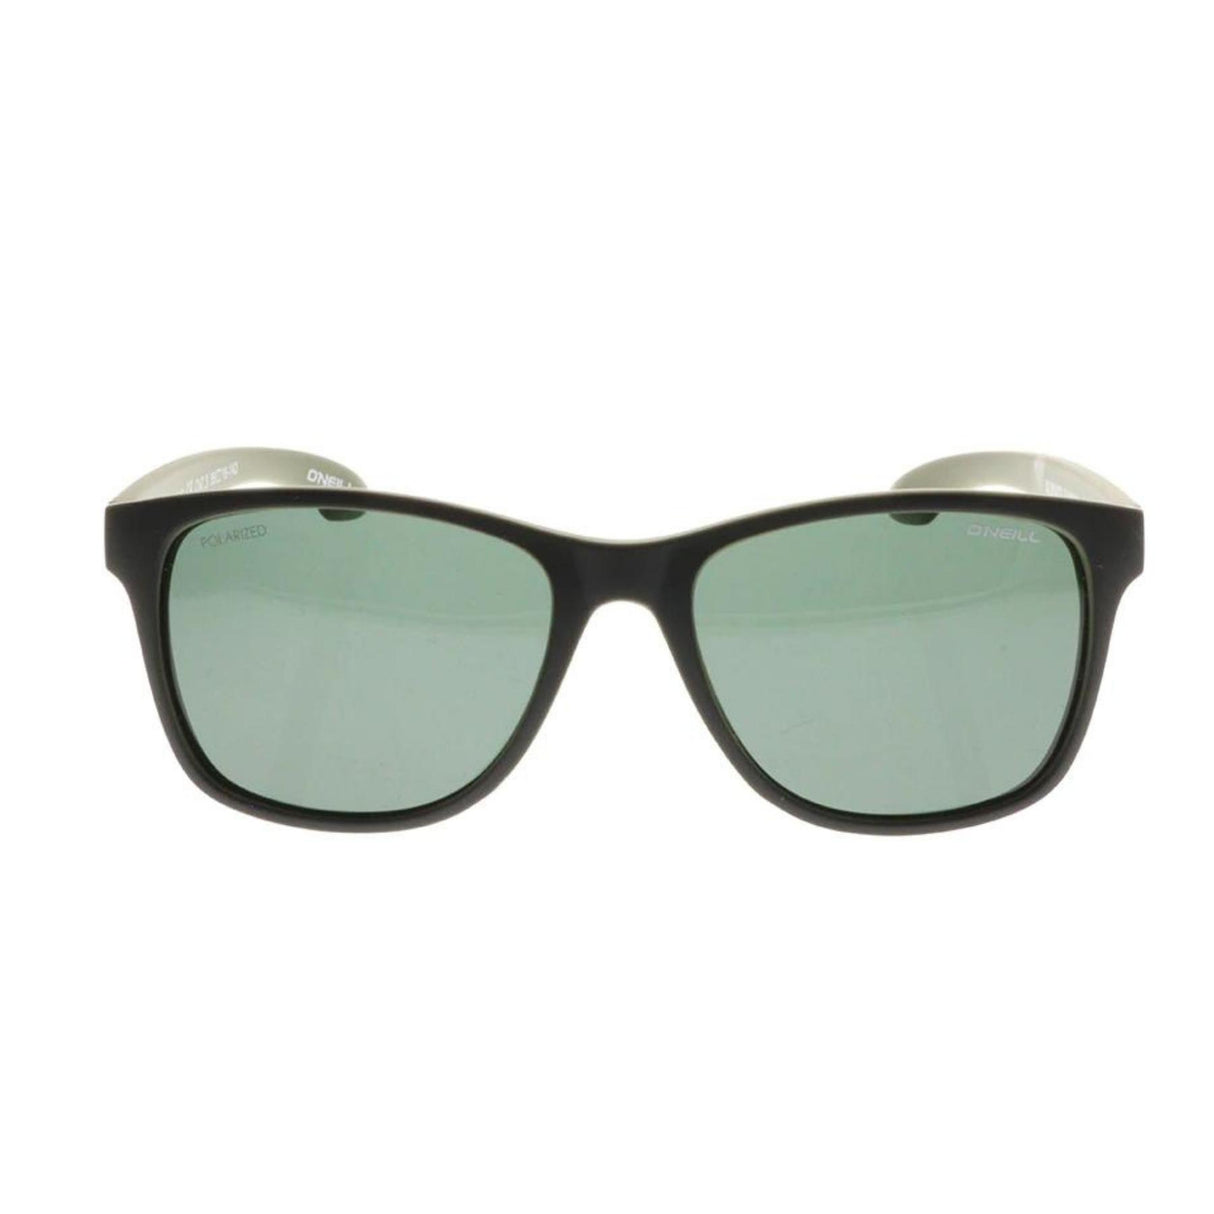 LENTE SOLAR - ONS - OFFSHORE 2.0 - 104P - BLACK OLIVE SOLID GREEN